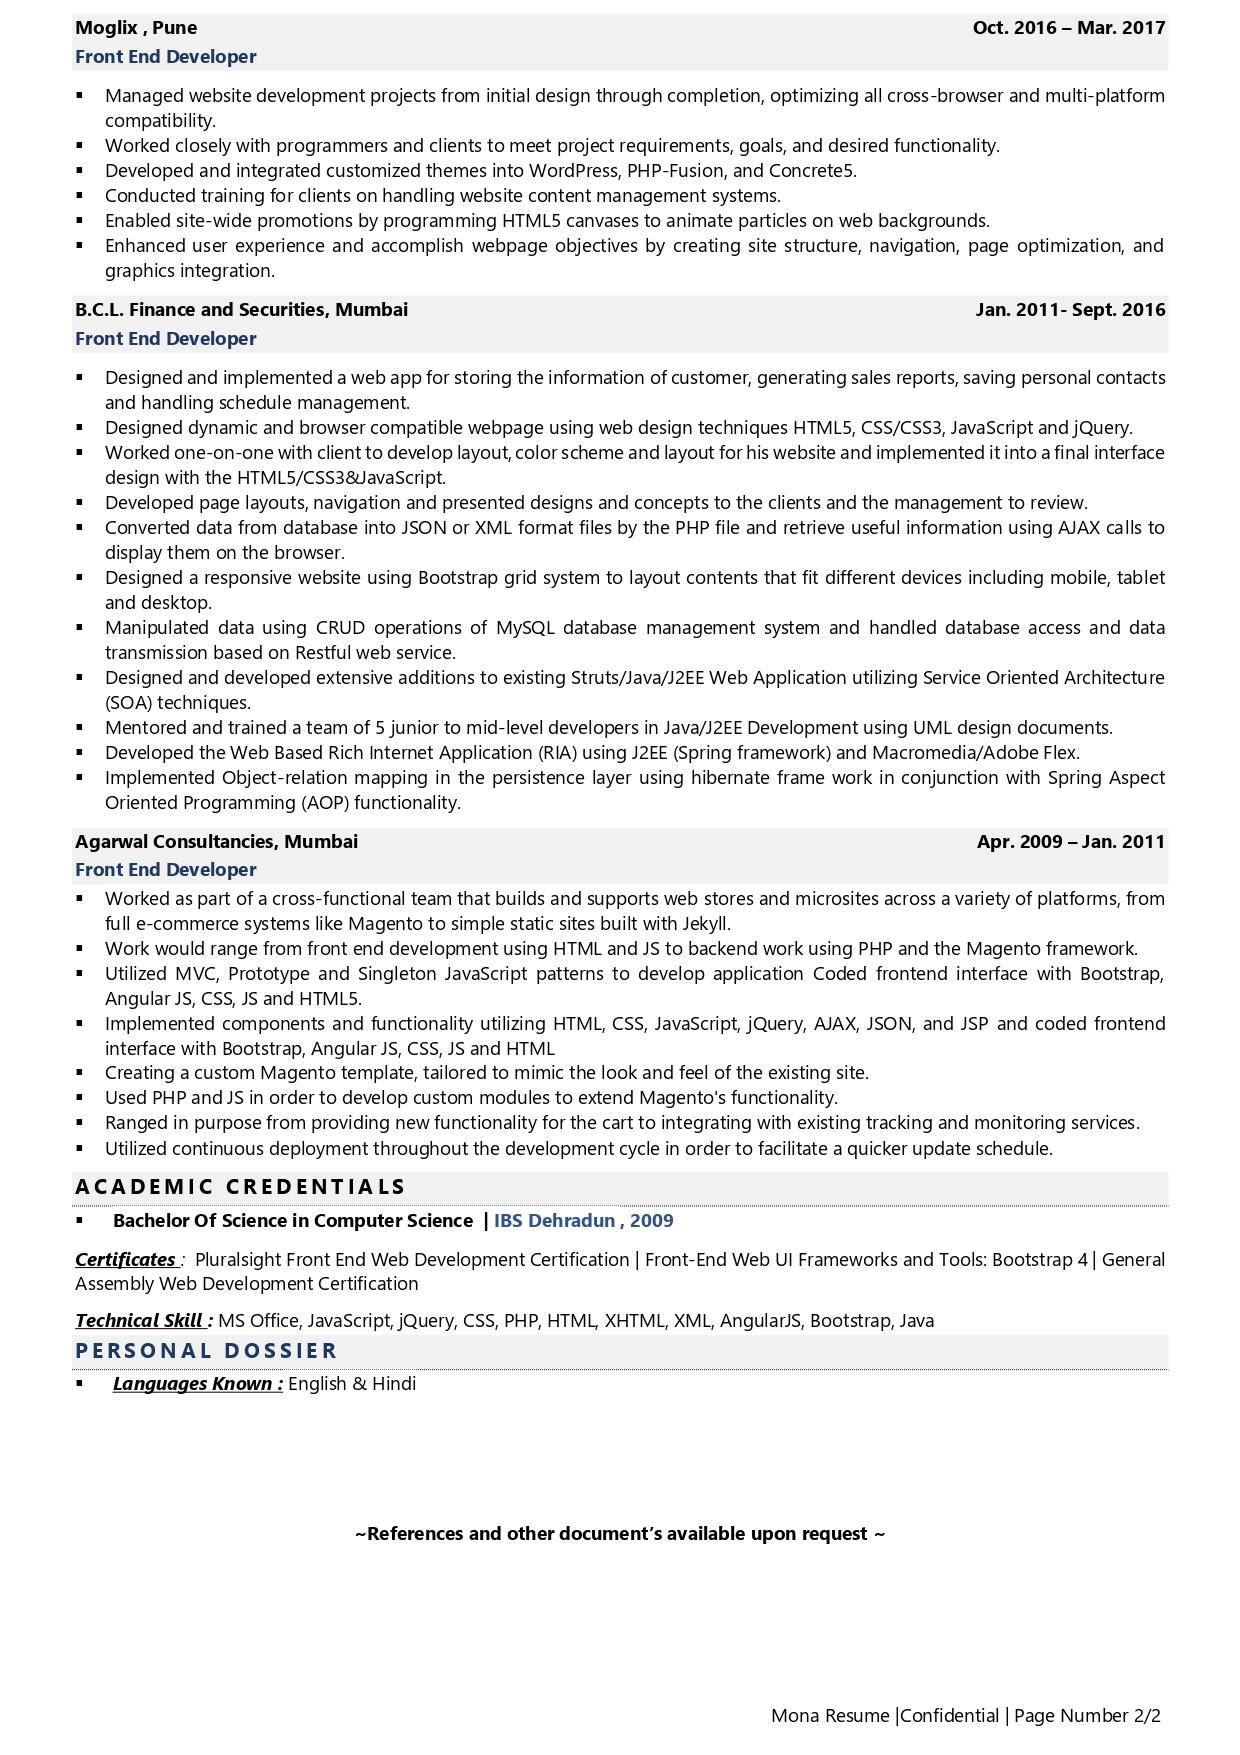 Front End Developer - Resume Example & Template